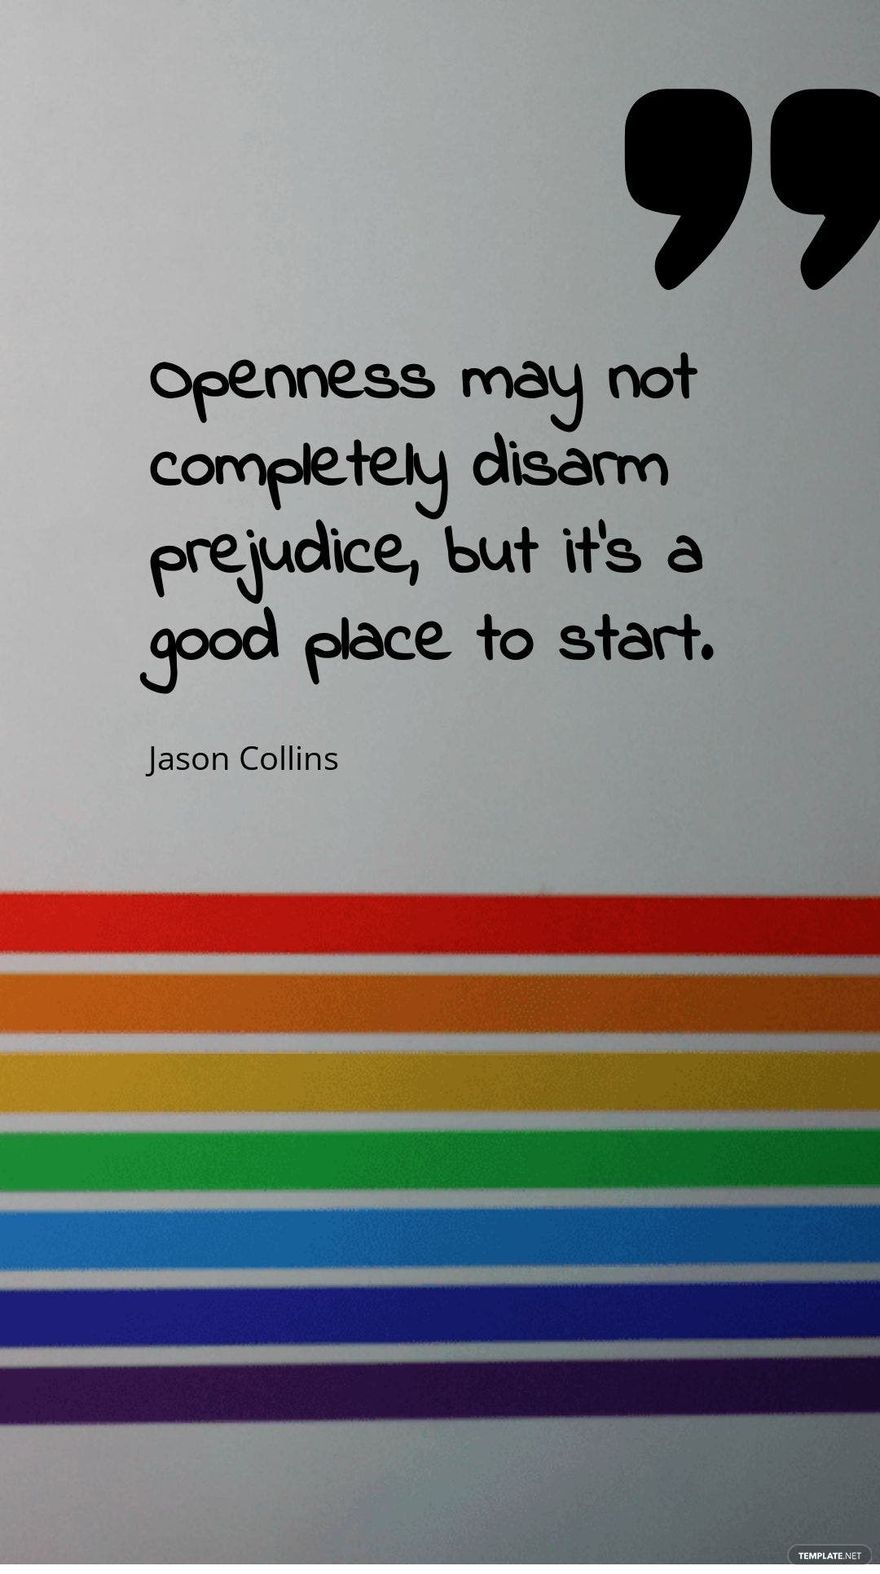 Free Jason Collins - Openness may not completely disarm prejudice, but it's a good place to start.